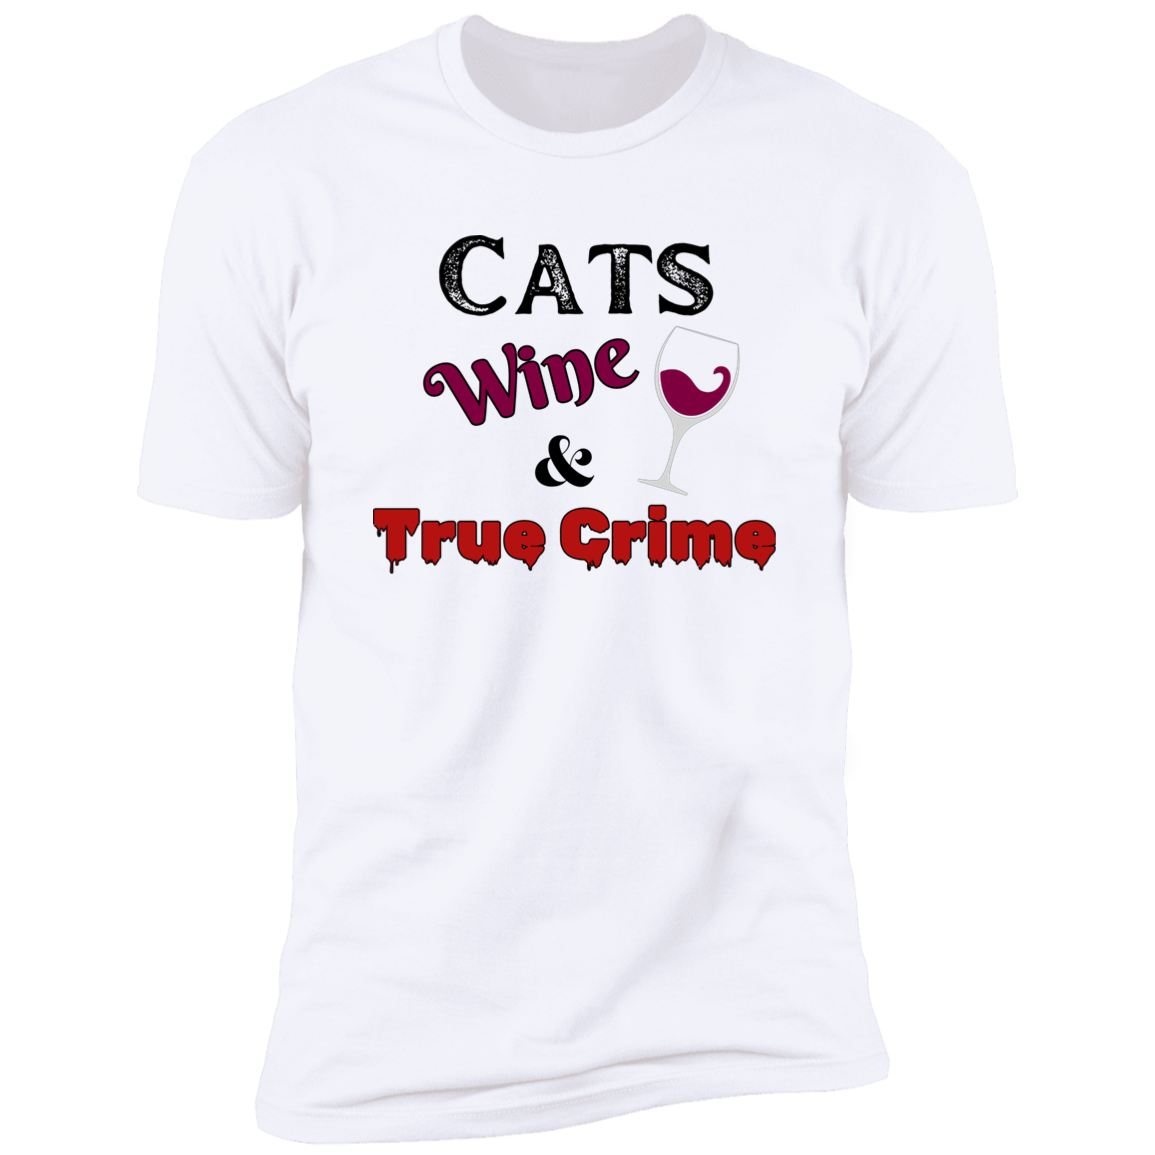 Cats Wine & True Crime T-shirt, Cat shirt for humans, funny cat shirt, in white